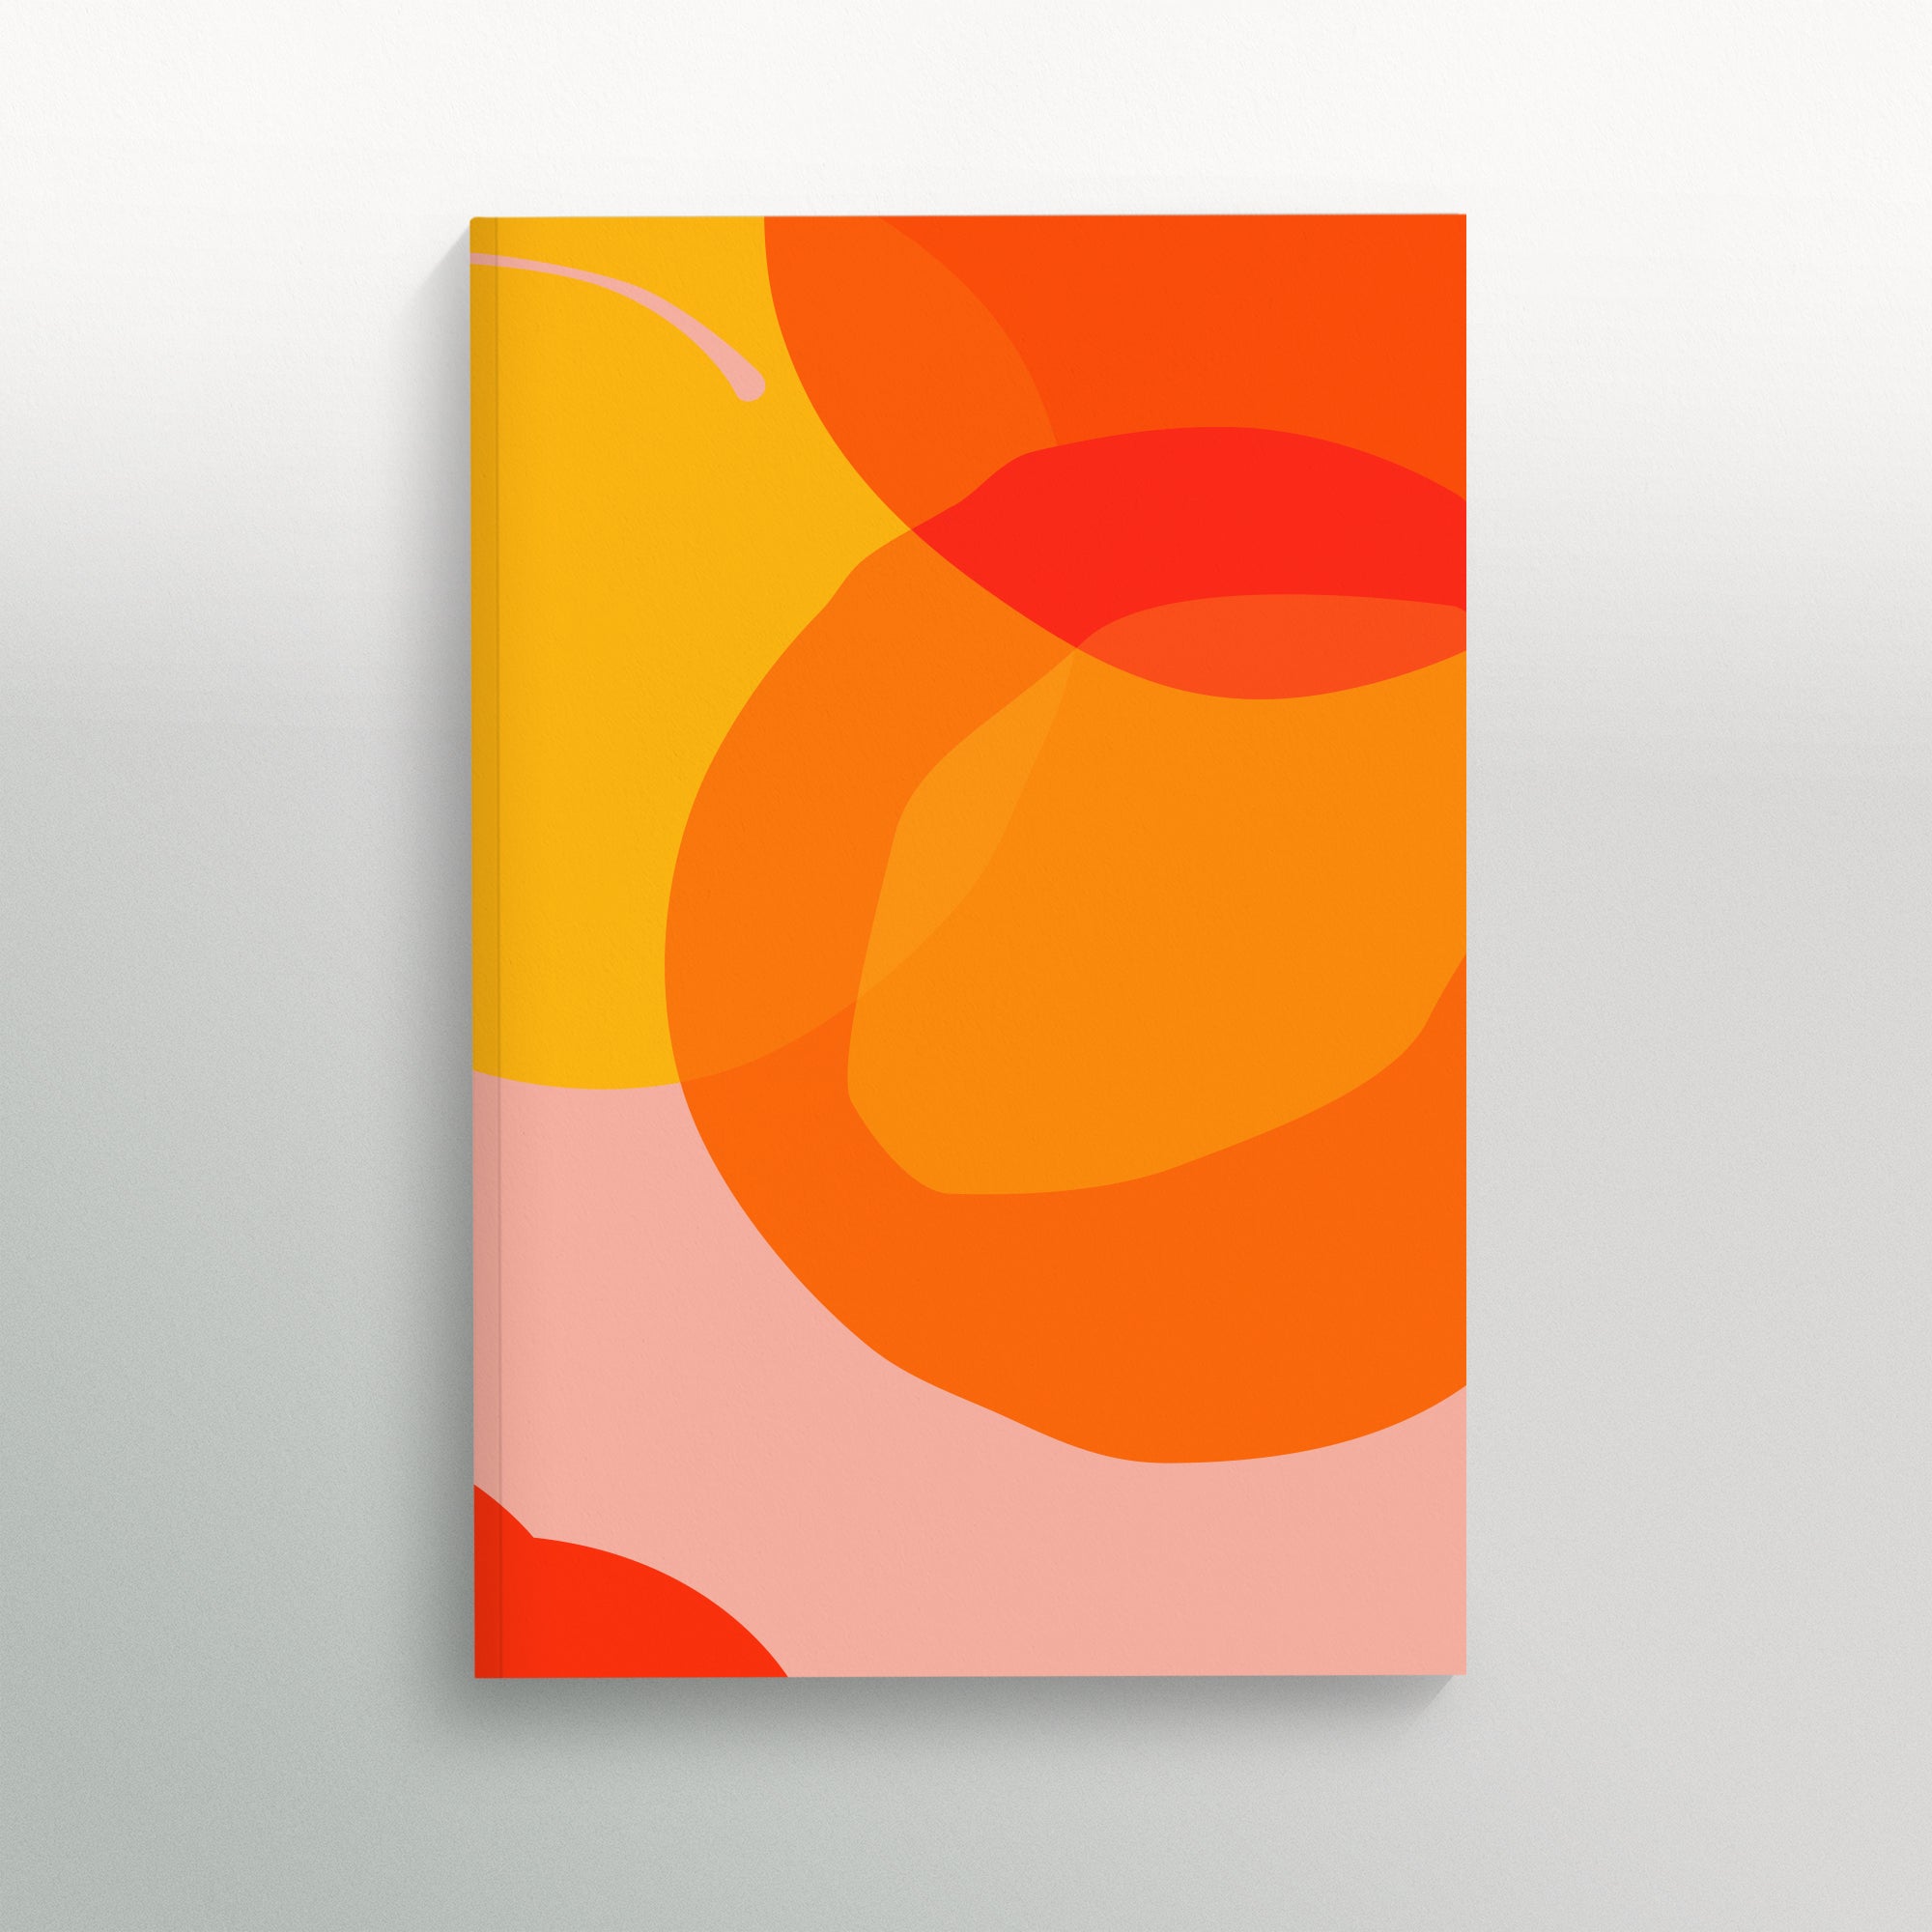 AMEICO - Official US Distributor of Common Modern - Sunrise Sketchbook